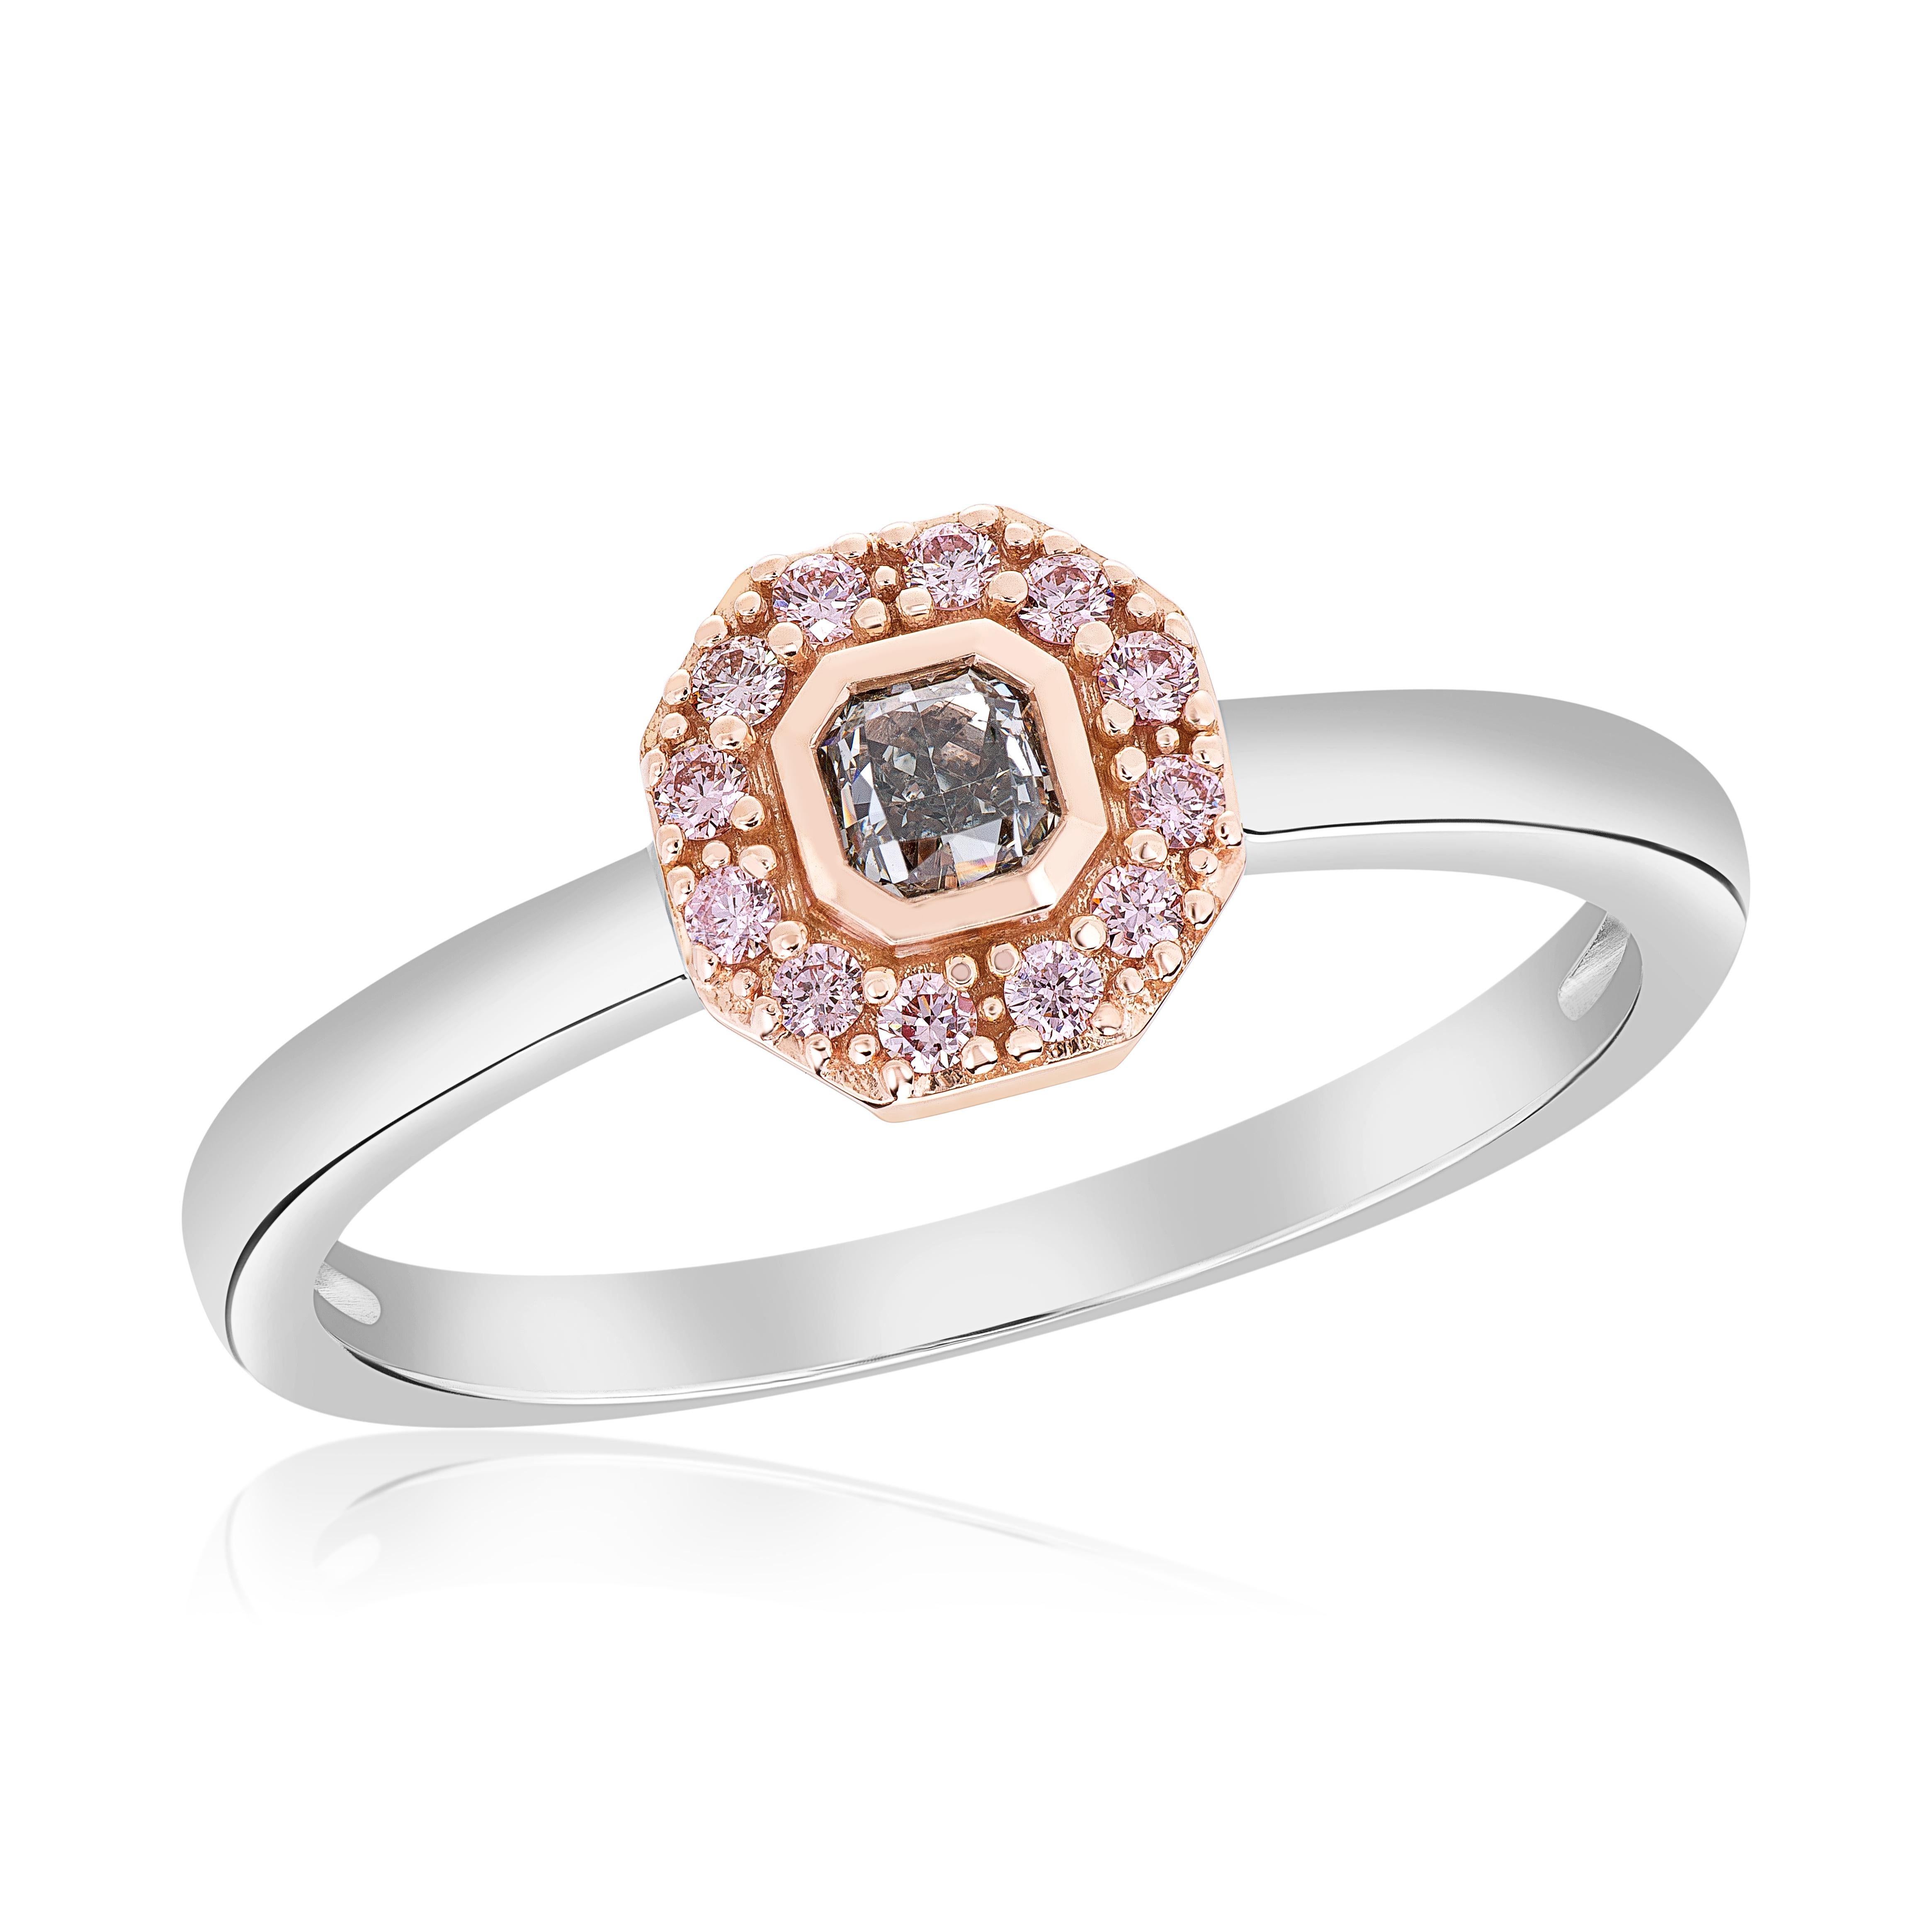 Stackable halo ring feating a 0.19 fancy intense green radiant. Accented by 14 argyle pink diamonds weighing 0.13 carats. Set in 14k rose and white gold, ring size 7. This ring can be accessorized by any of our stackable rings or perhaps one that is